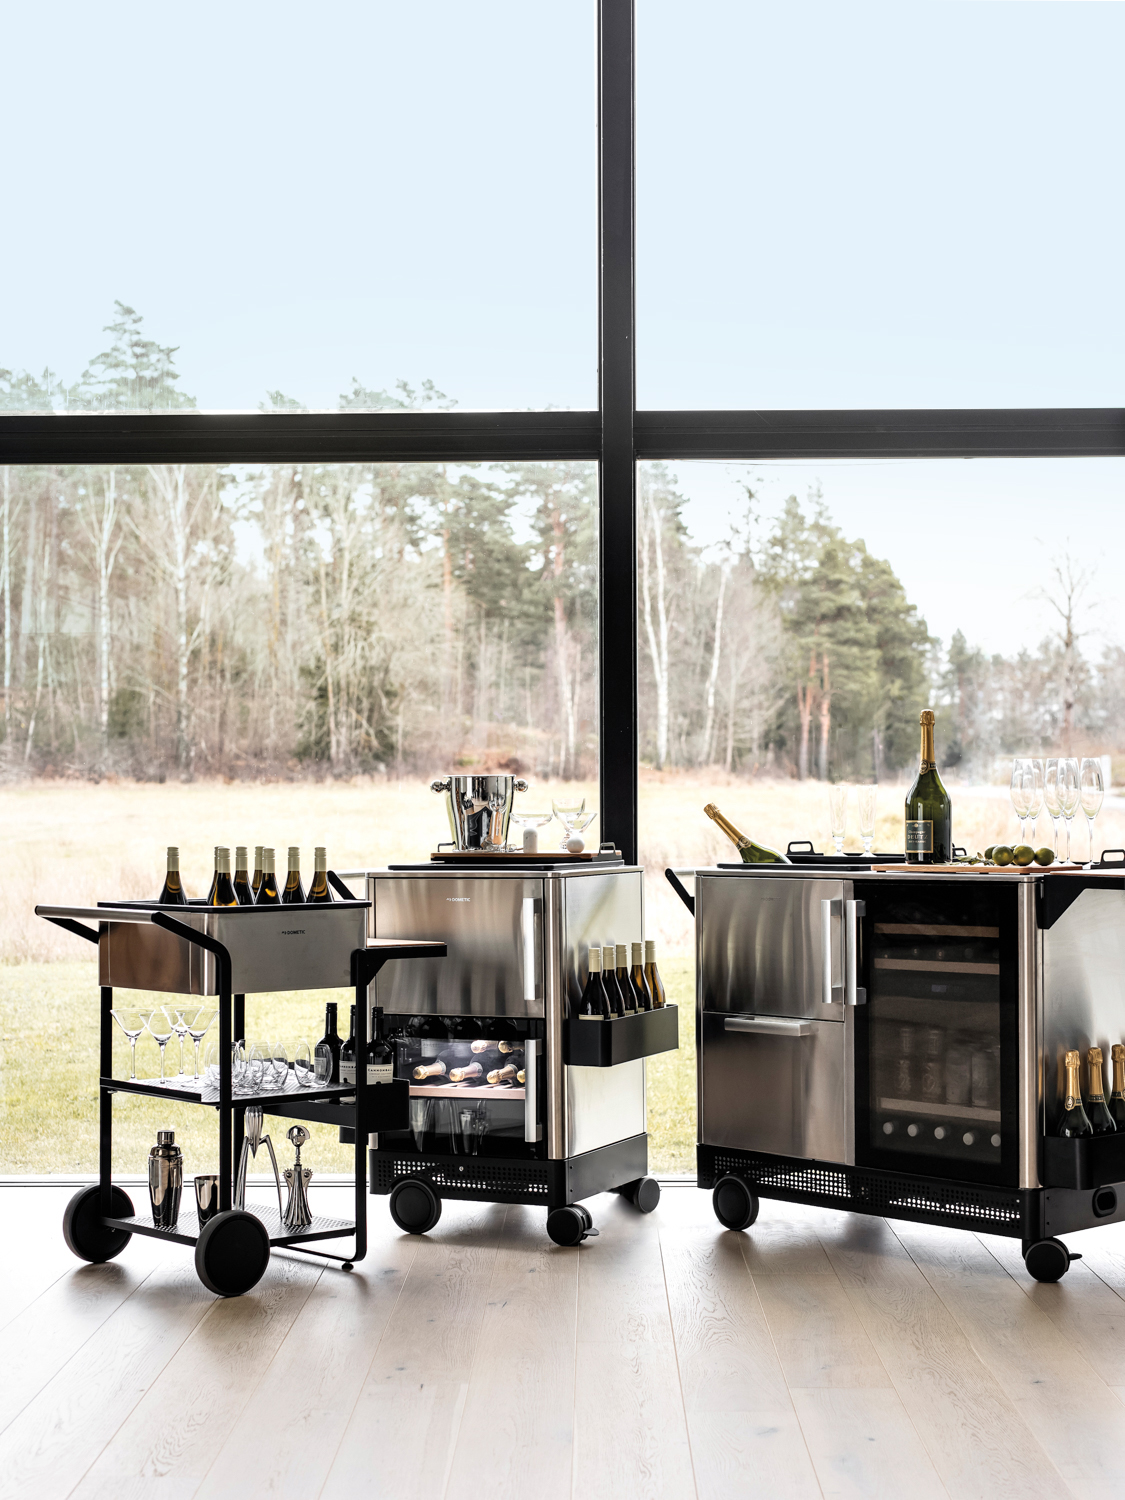 Three different stainless steel bar carts sit in front of an expansive window with nature views. RED Winner.